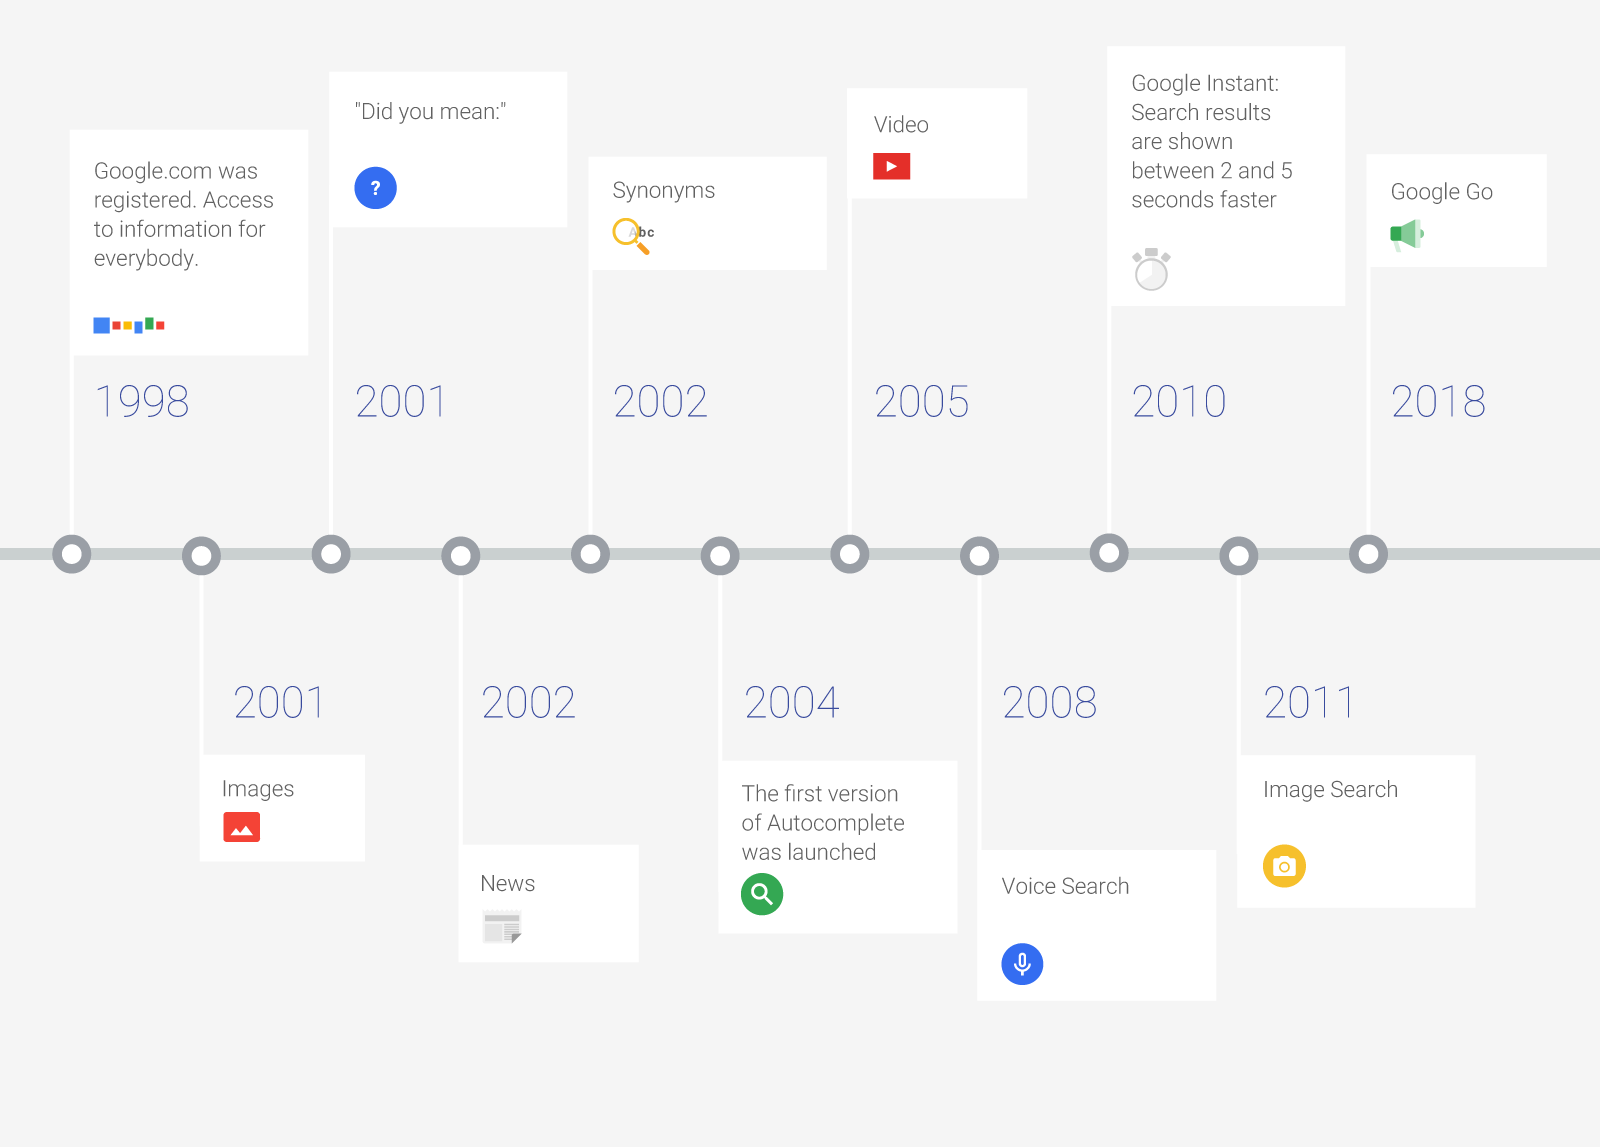 20 years of Google search evolution